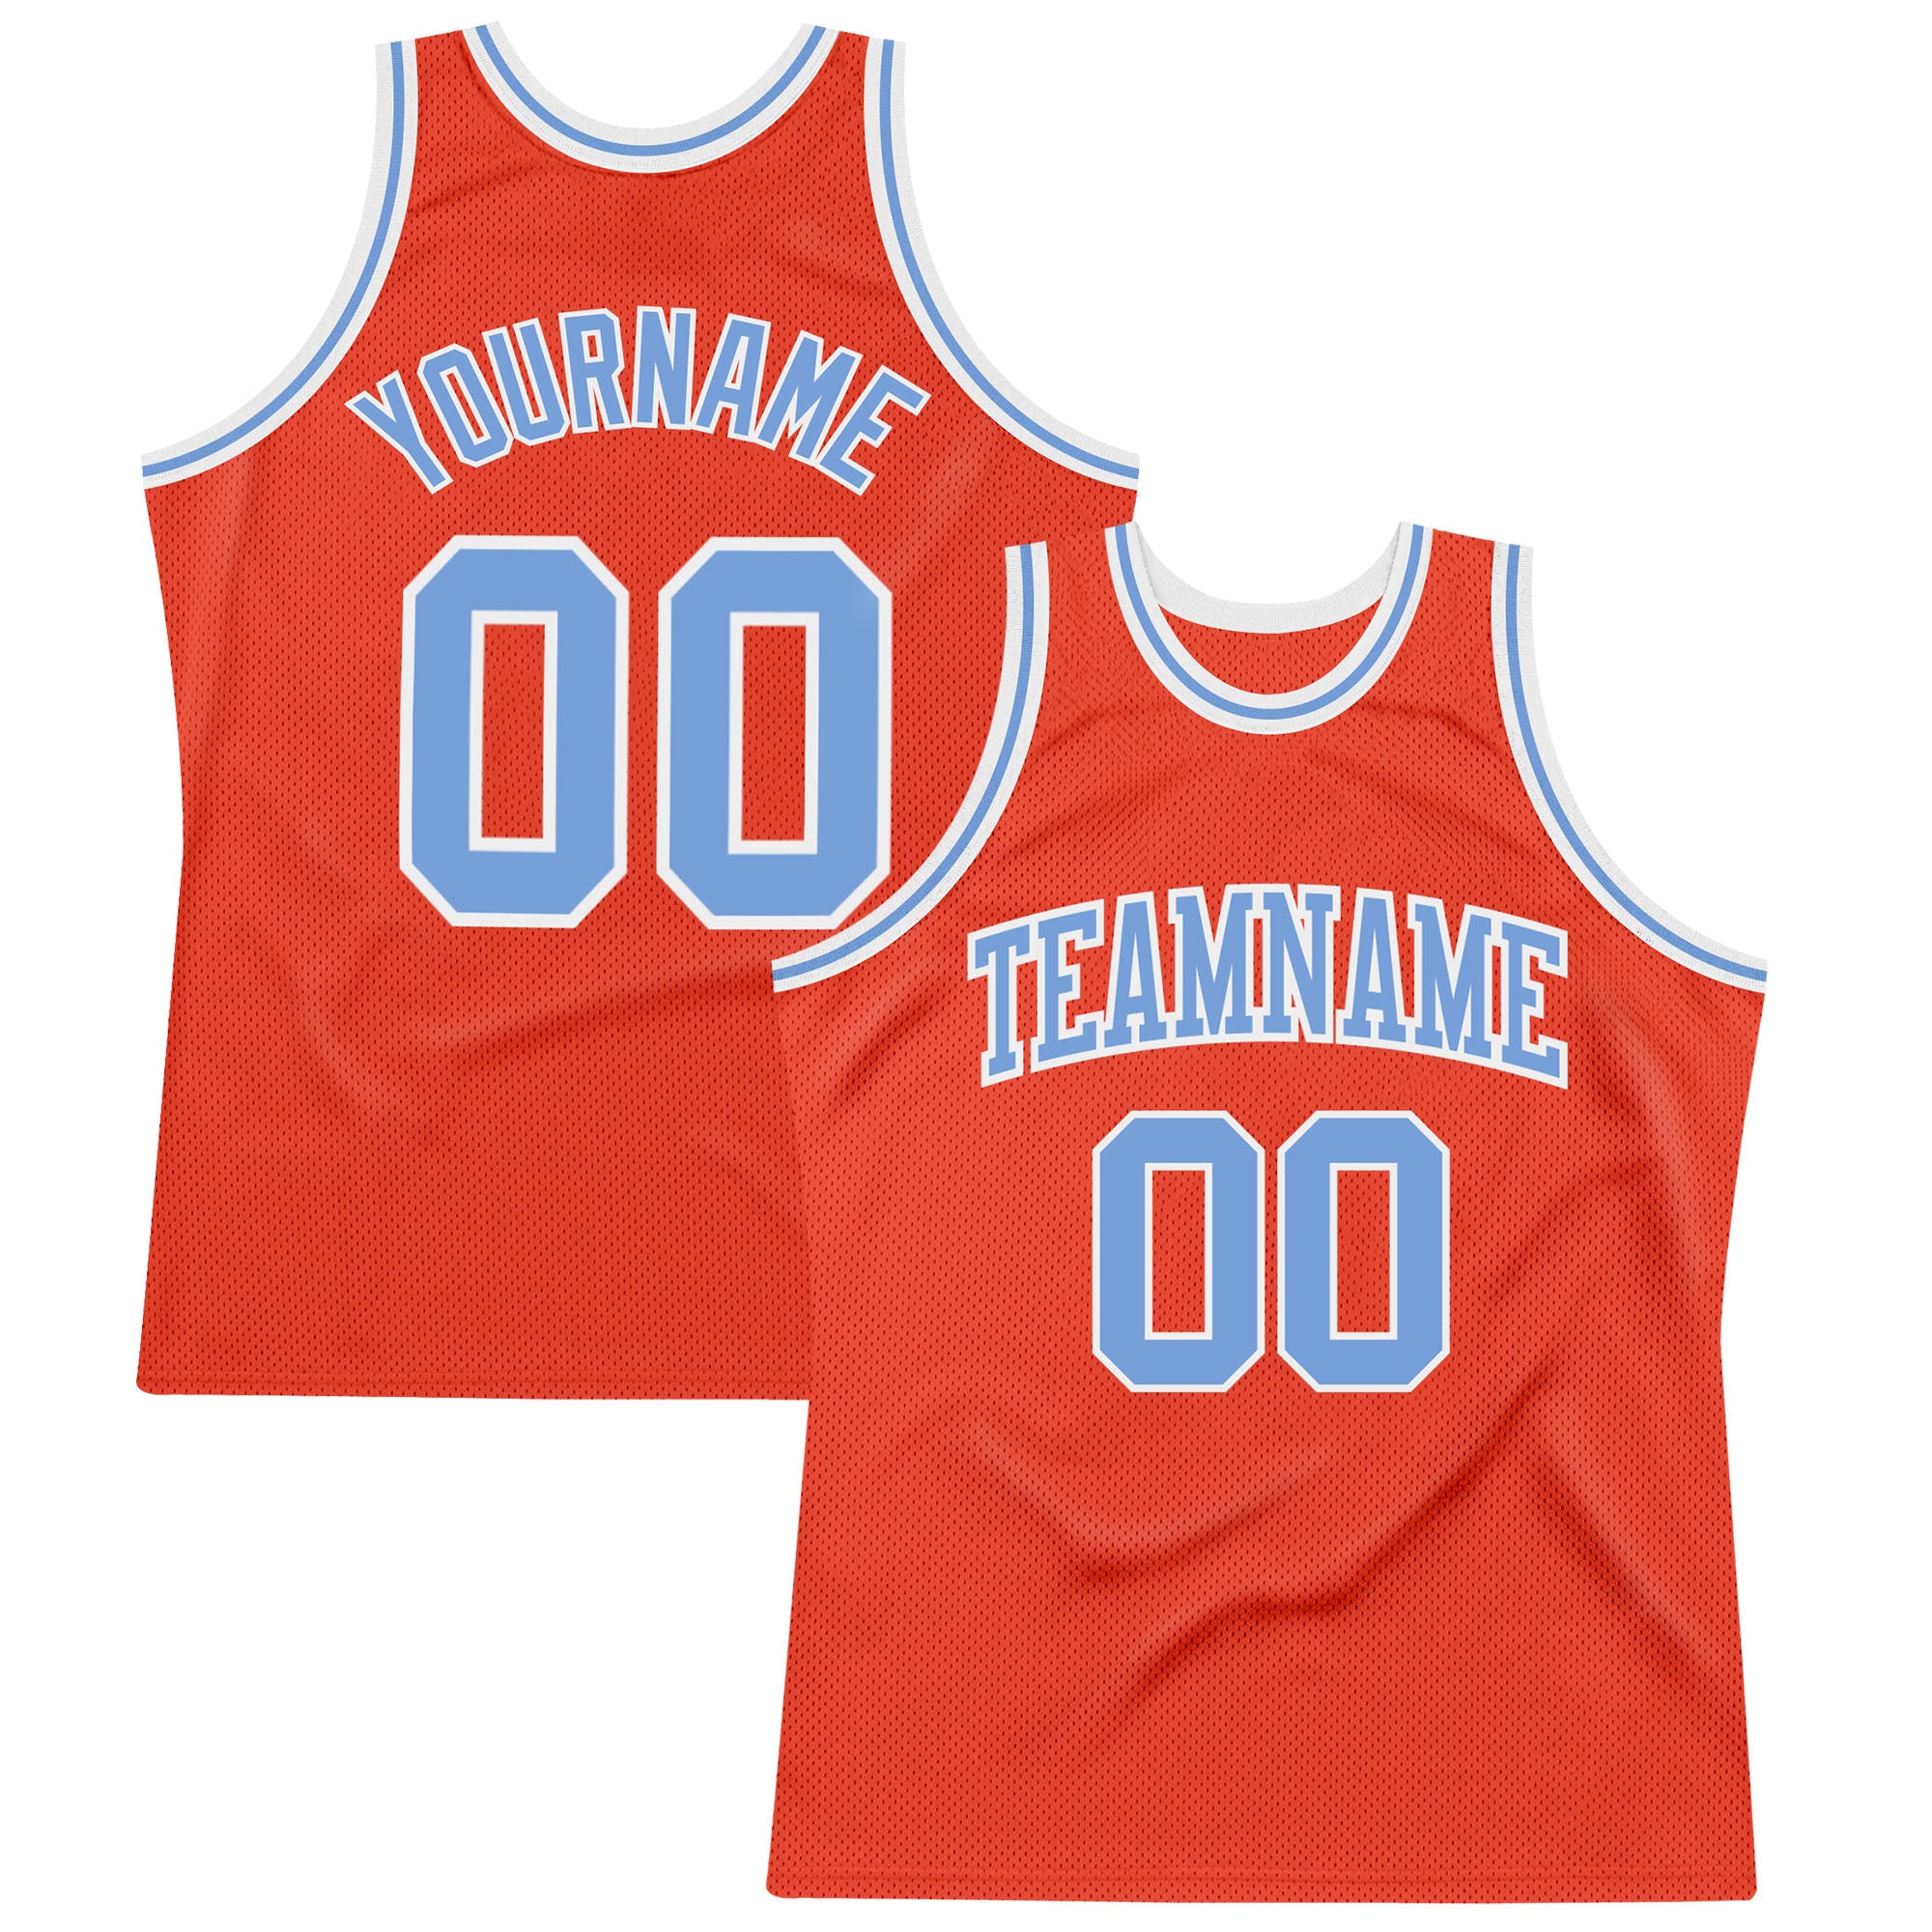 Custom Light Blue Black-White Authentic Throwback Basketball Jersey Discount